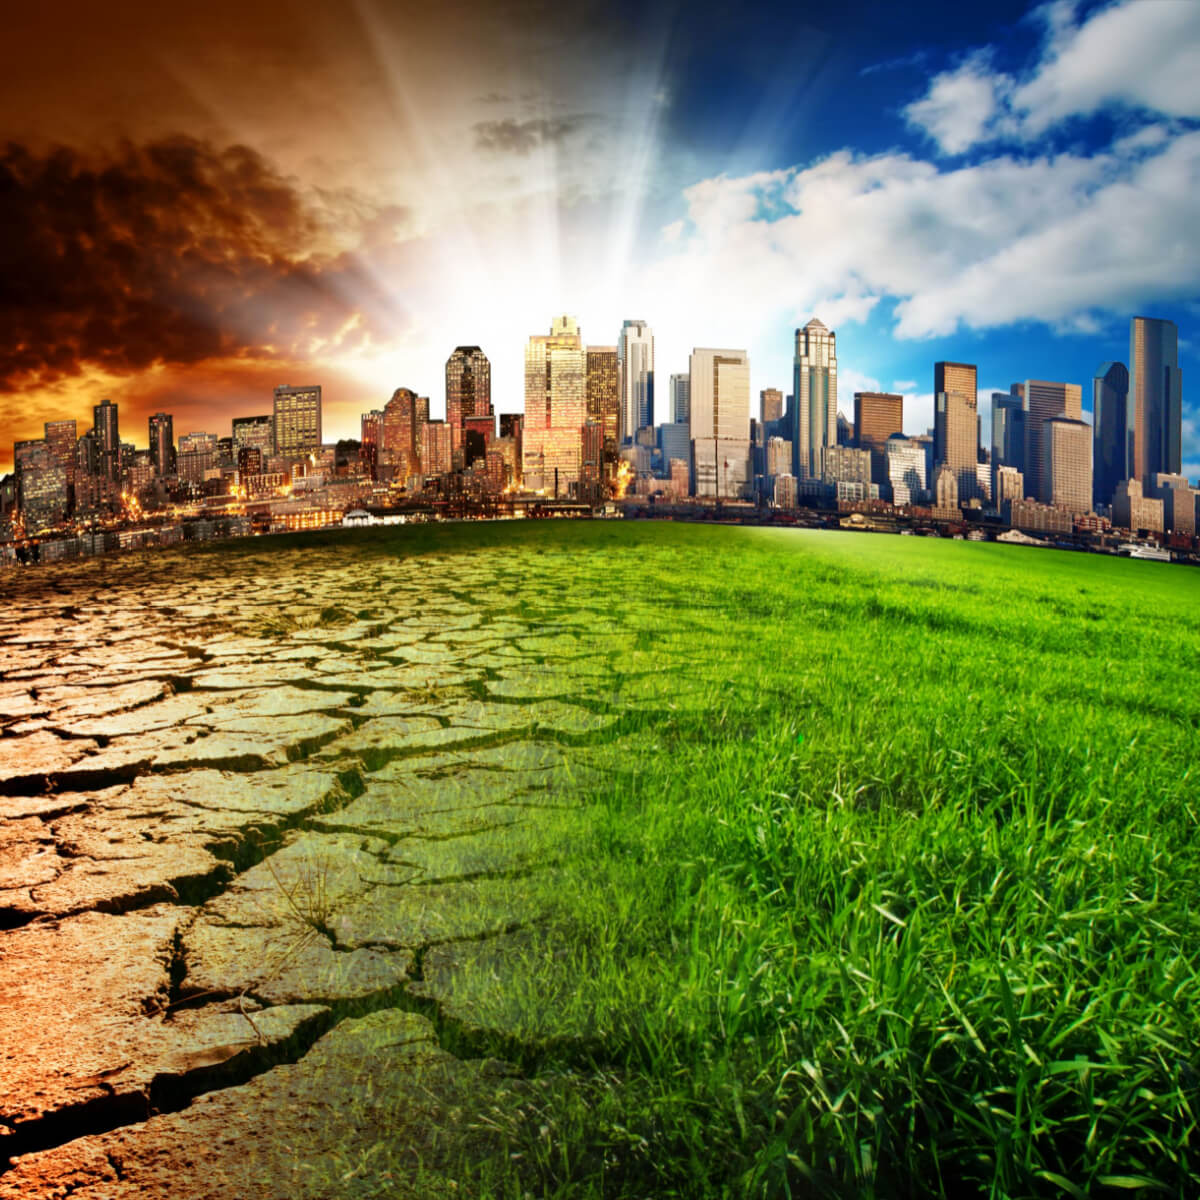 Will climate change impact or raise your insurance rates?